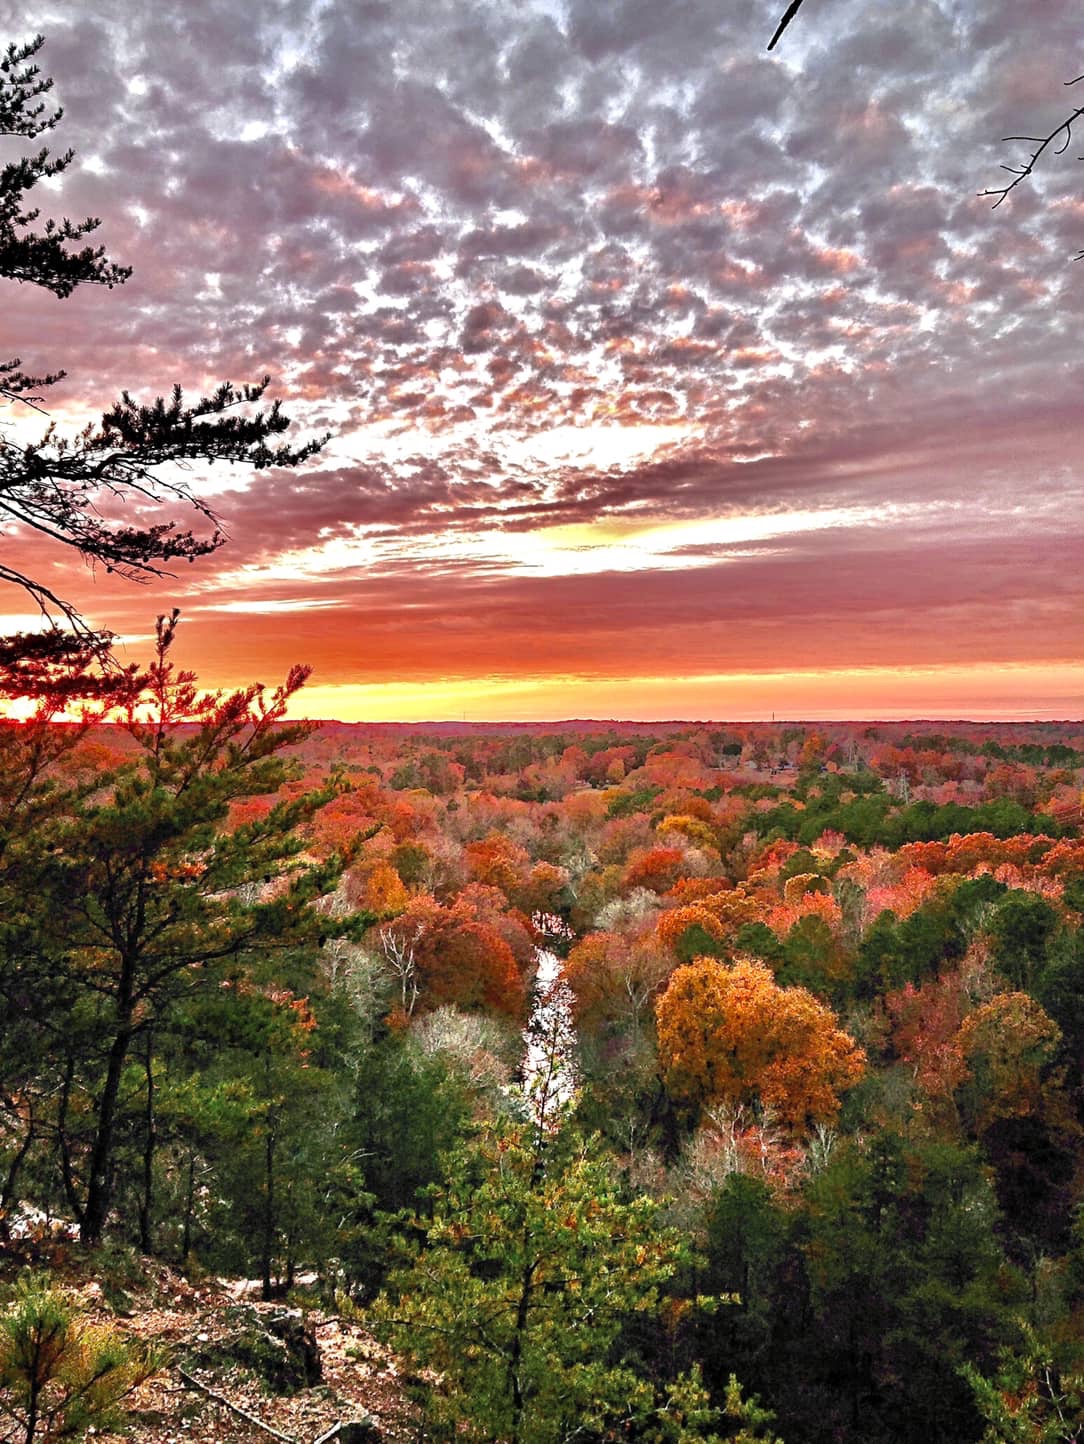 Eno River and surrounding forest at sunset in fall